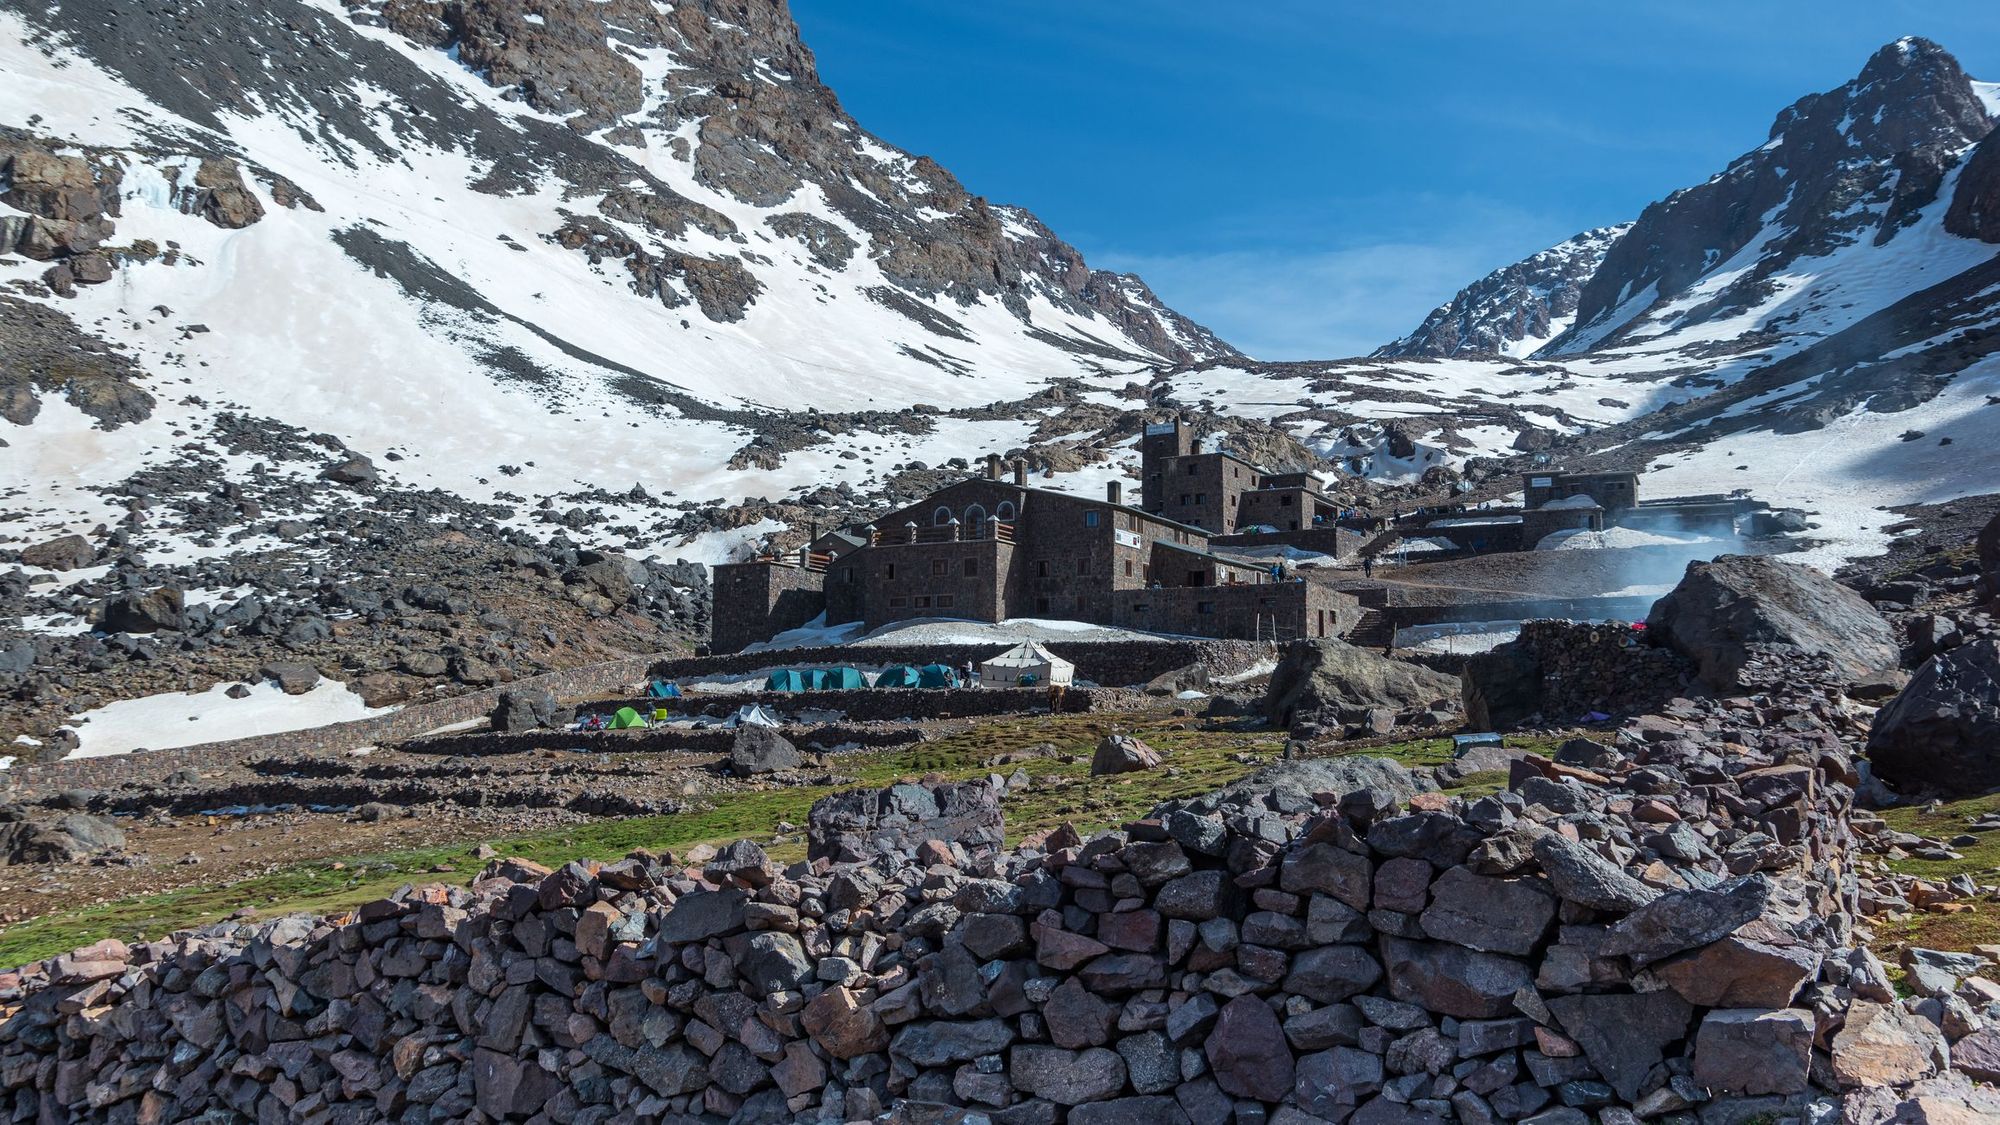 Les Mouflons Refuge, used to climb to the summit of Morocco's Mount Toubkal.